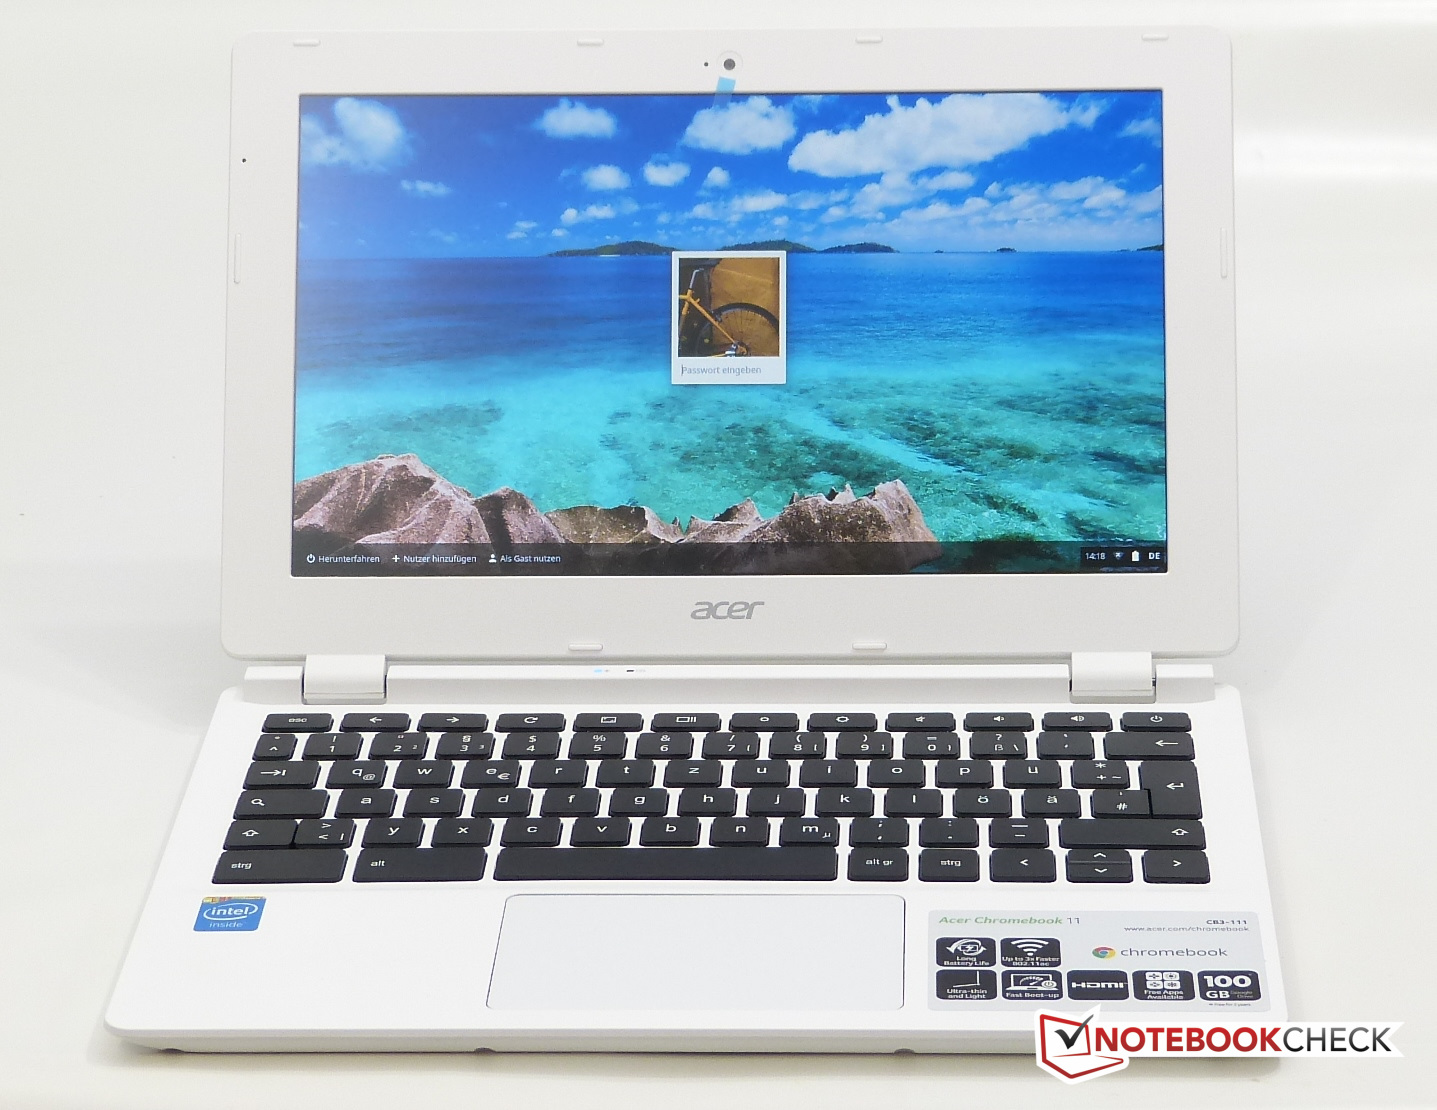 ACER CHROMEBOOK R11 CB3-111C8 SERIES EXCELLENT WITH CHARGER Amd